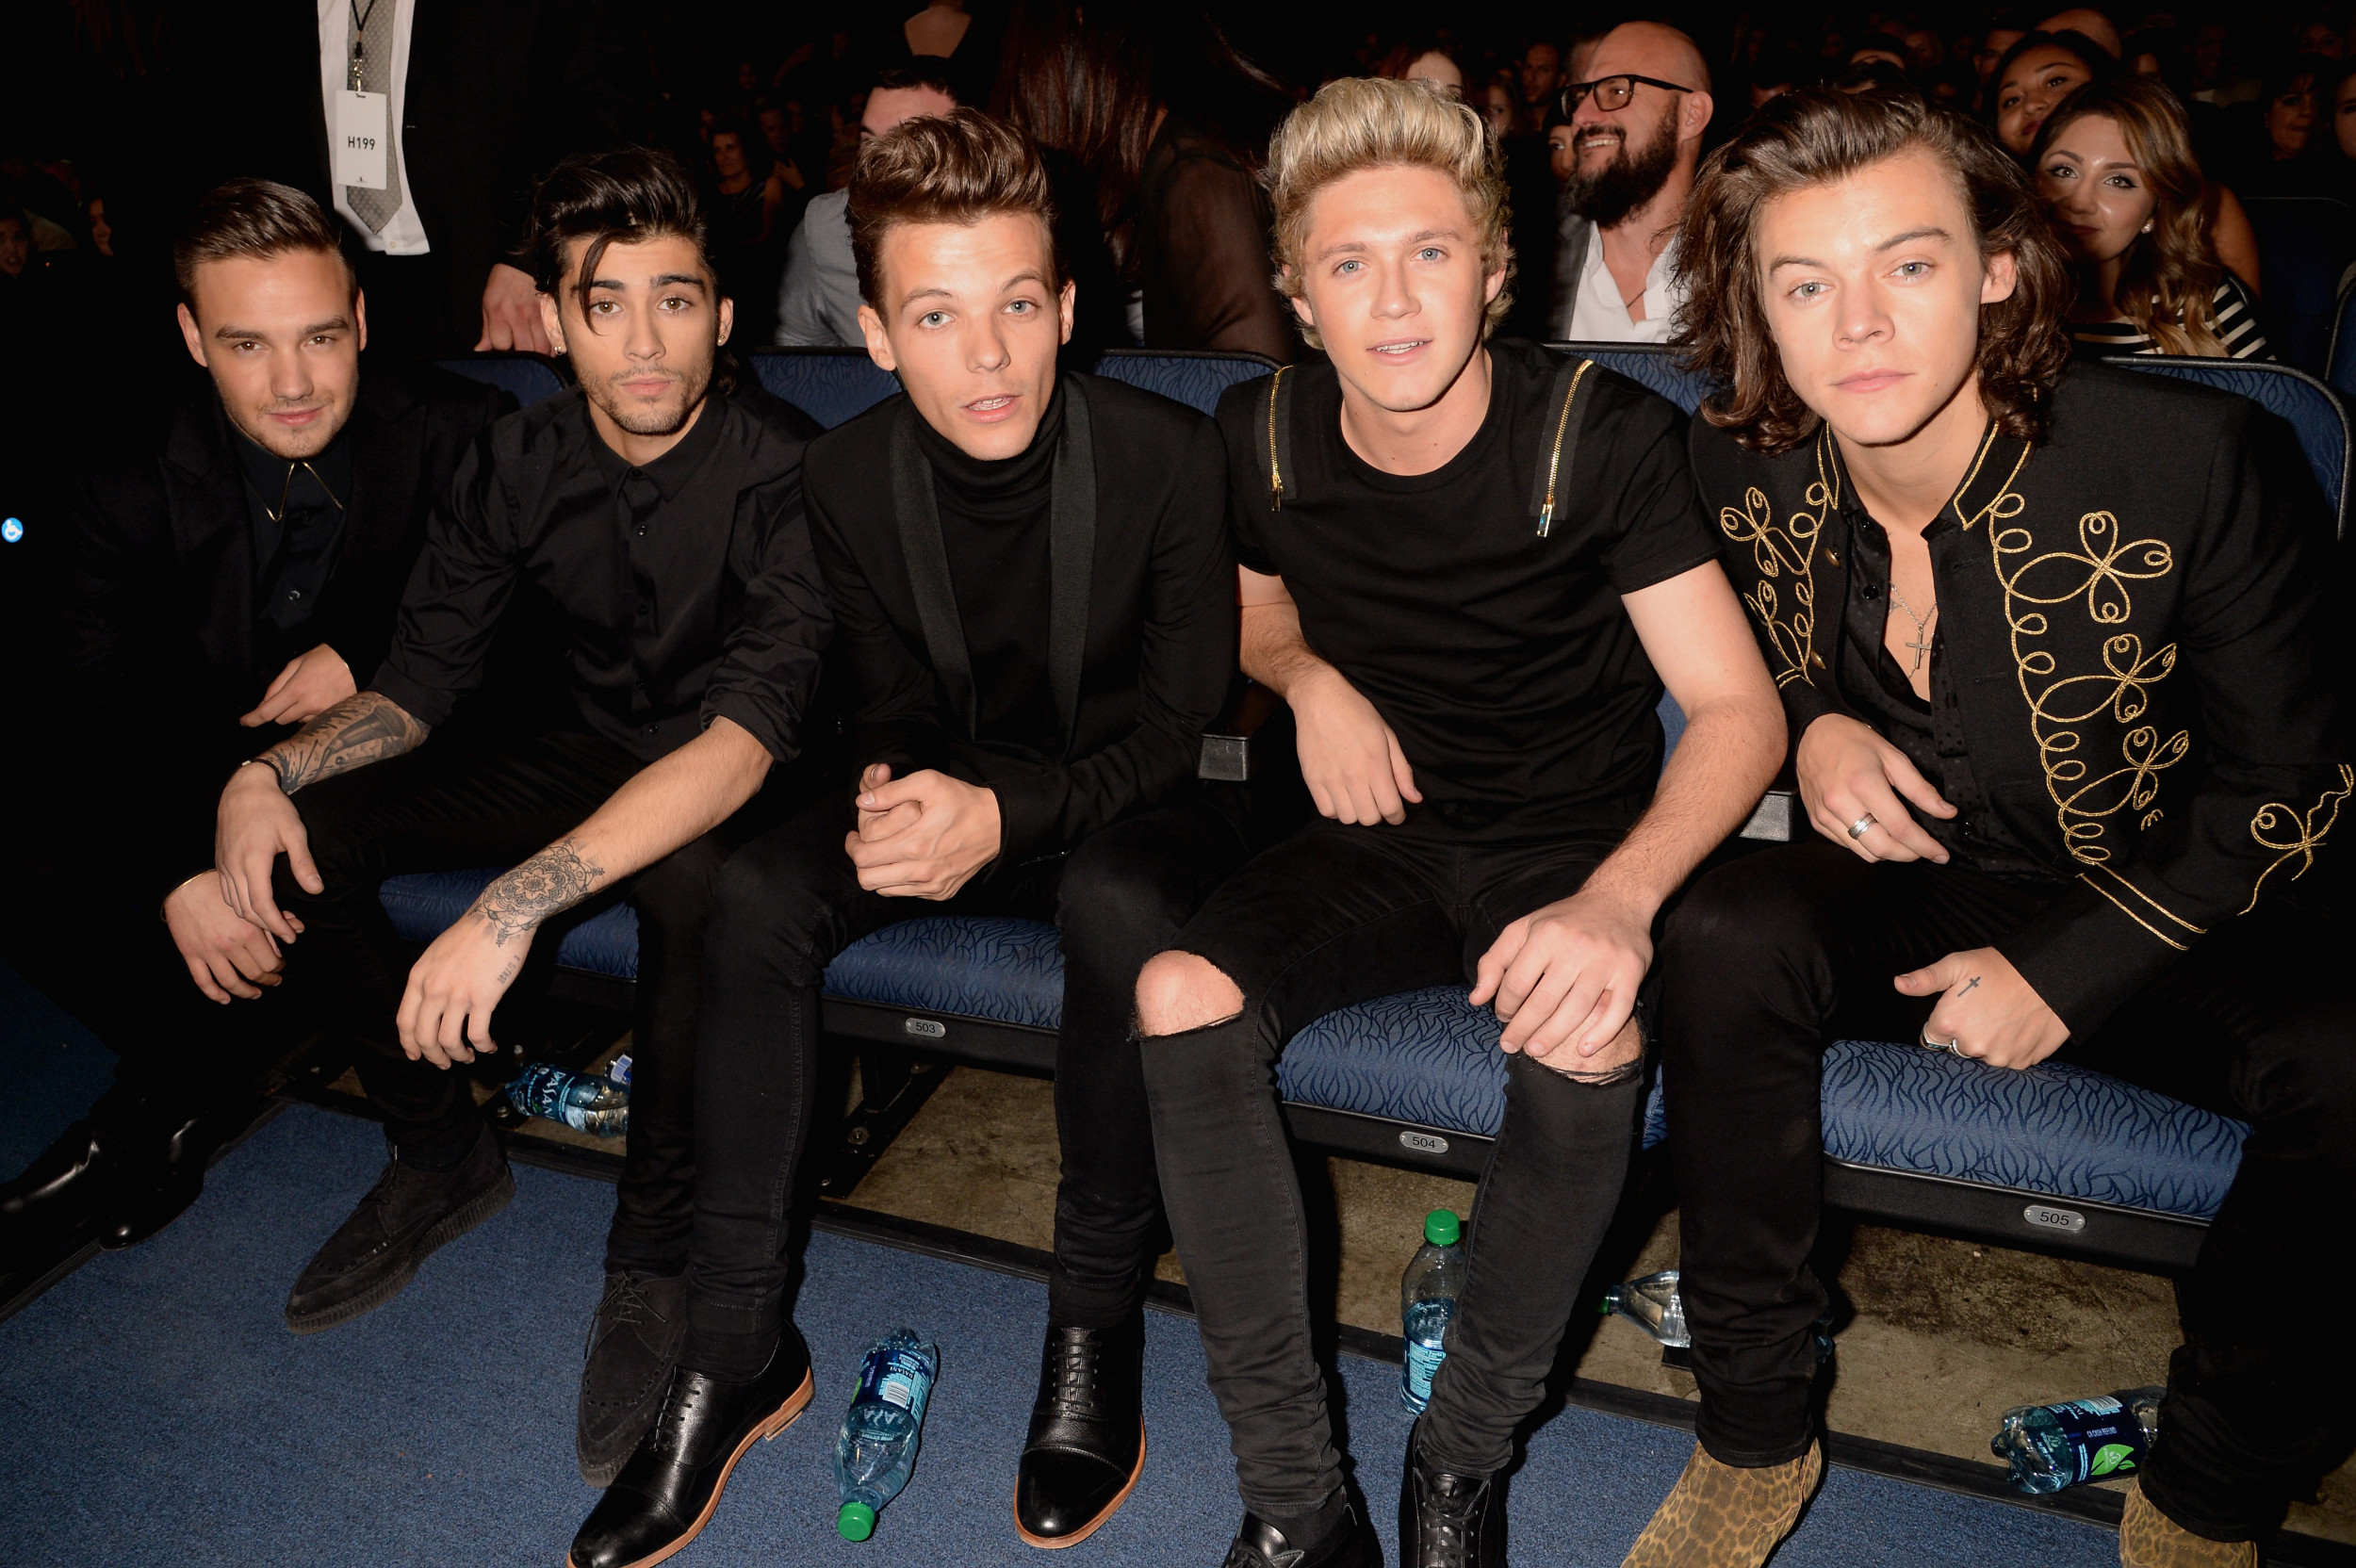 One Direction 'Where We Are' Setlist The Songs in the Free Concert Film